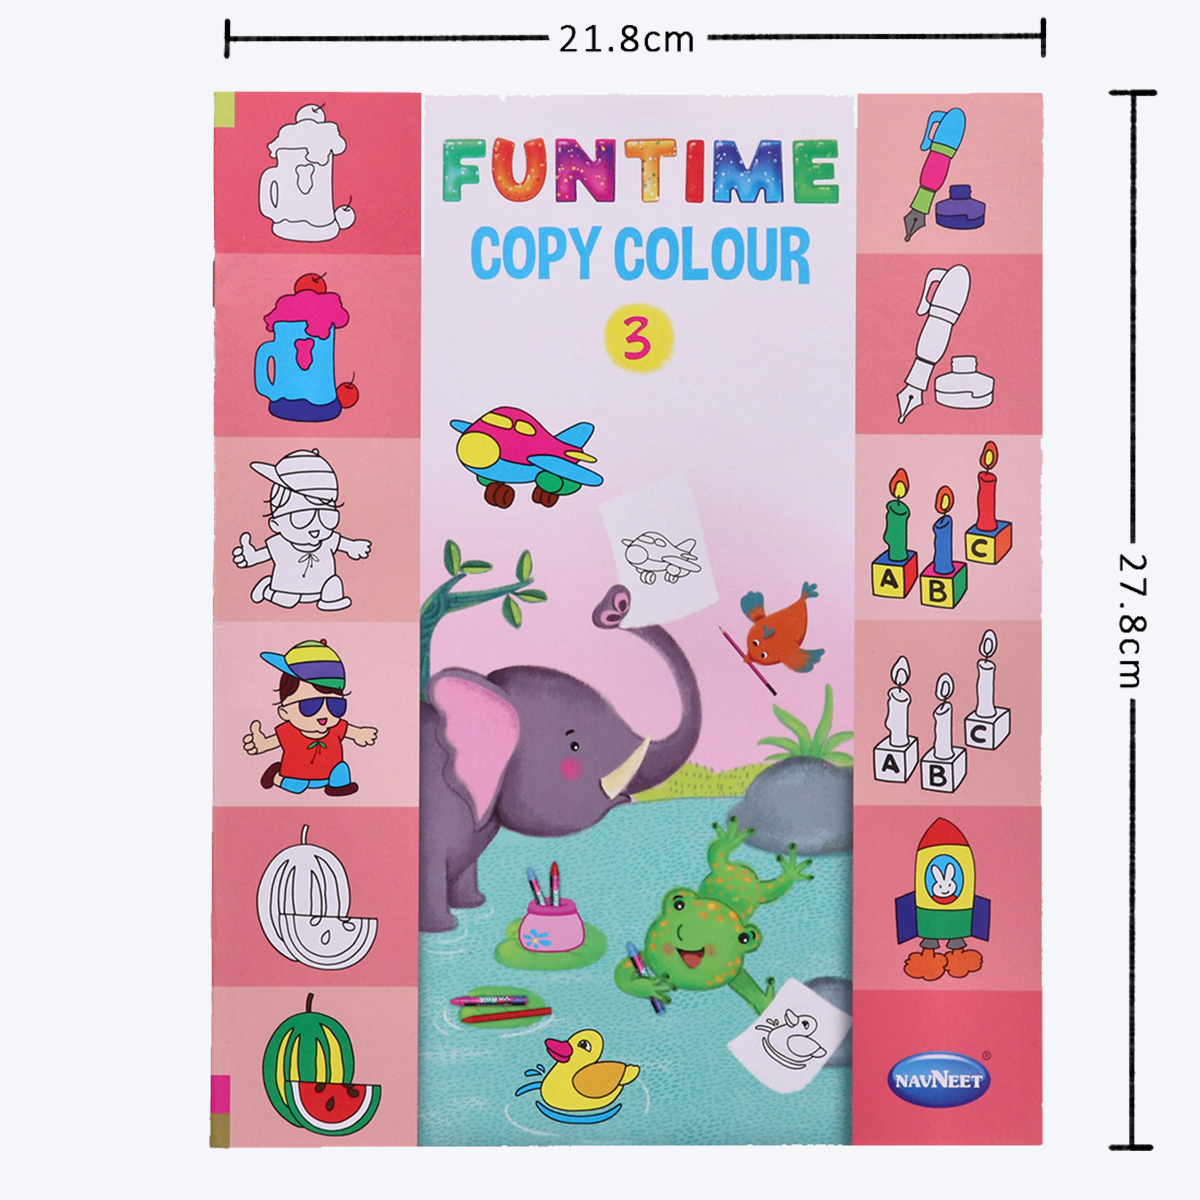 Navneet Funtime copy colour Book series set of 4 books